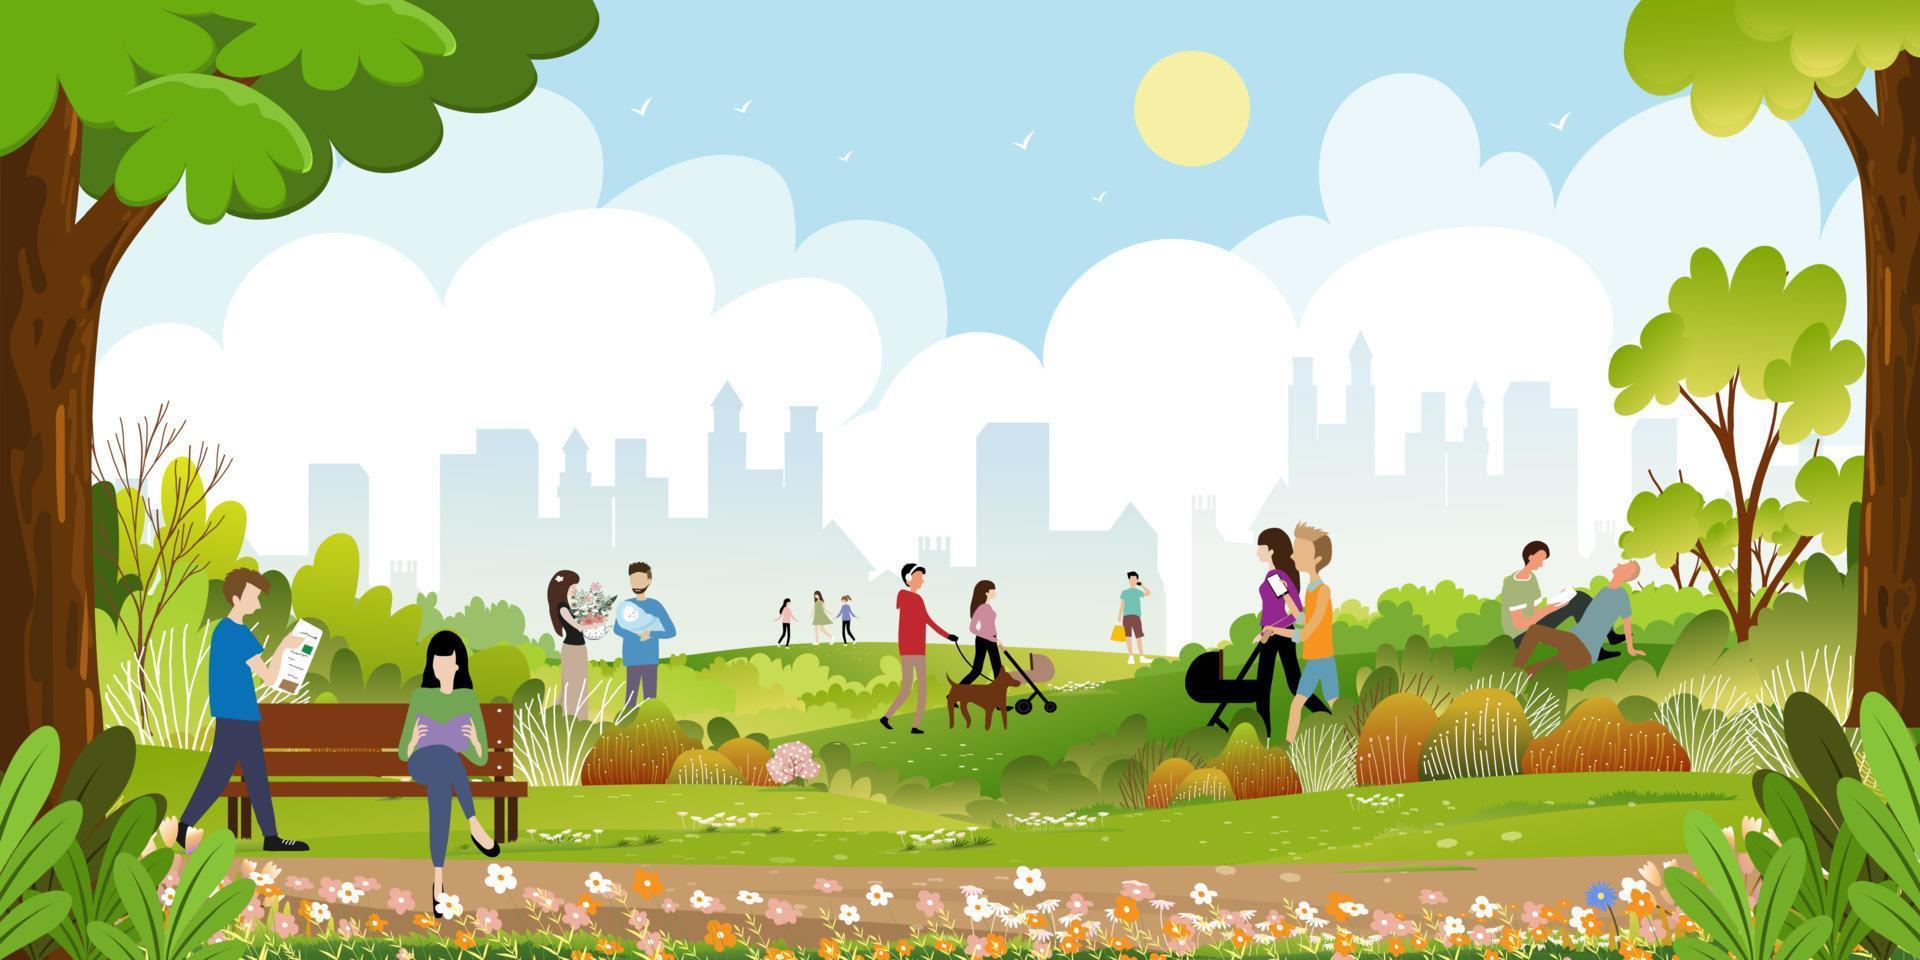 Morning city park with family having fun in the park,boys walking the dog,man talking on phone, women sitting on bench, two guys reading a book under tree,City lifestyle of people in Summer time vector